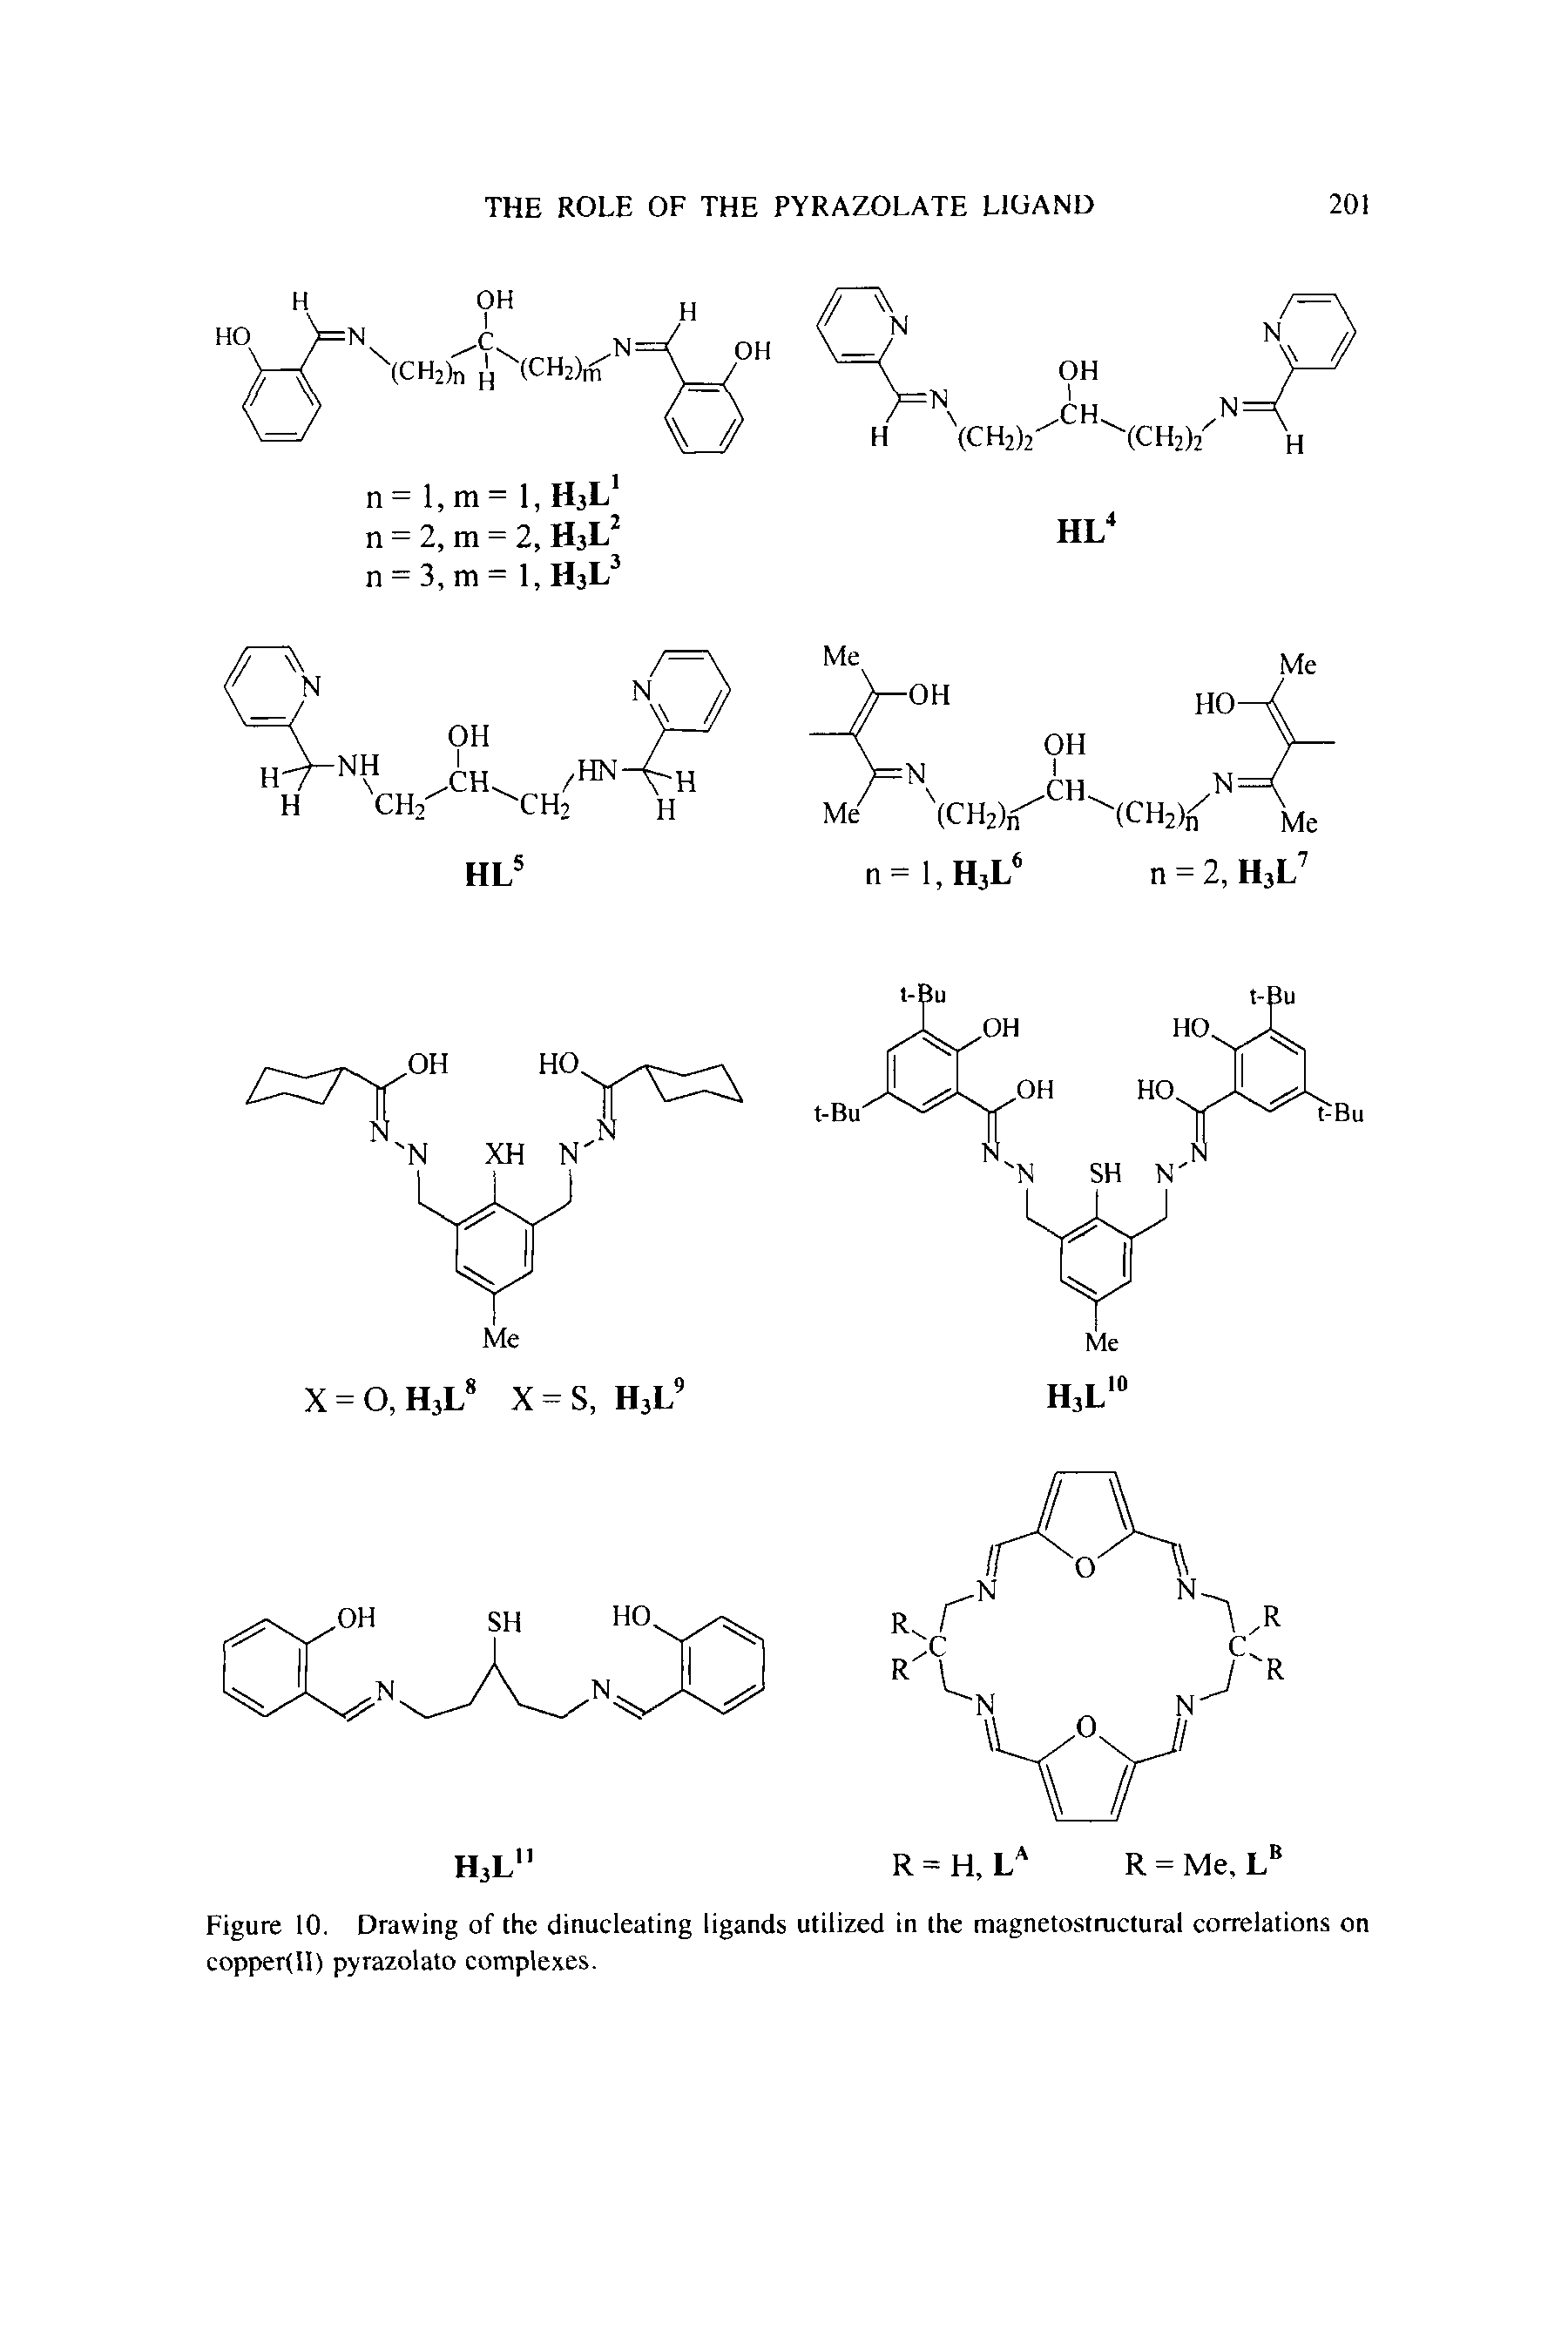 Figure 10. Drawing of the dinucleating ligands utilized in the magnetostructural correlations on copper(ll) pyrazolato complexes.